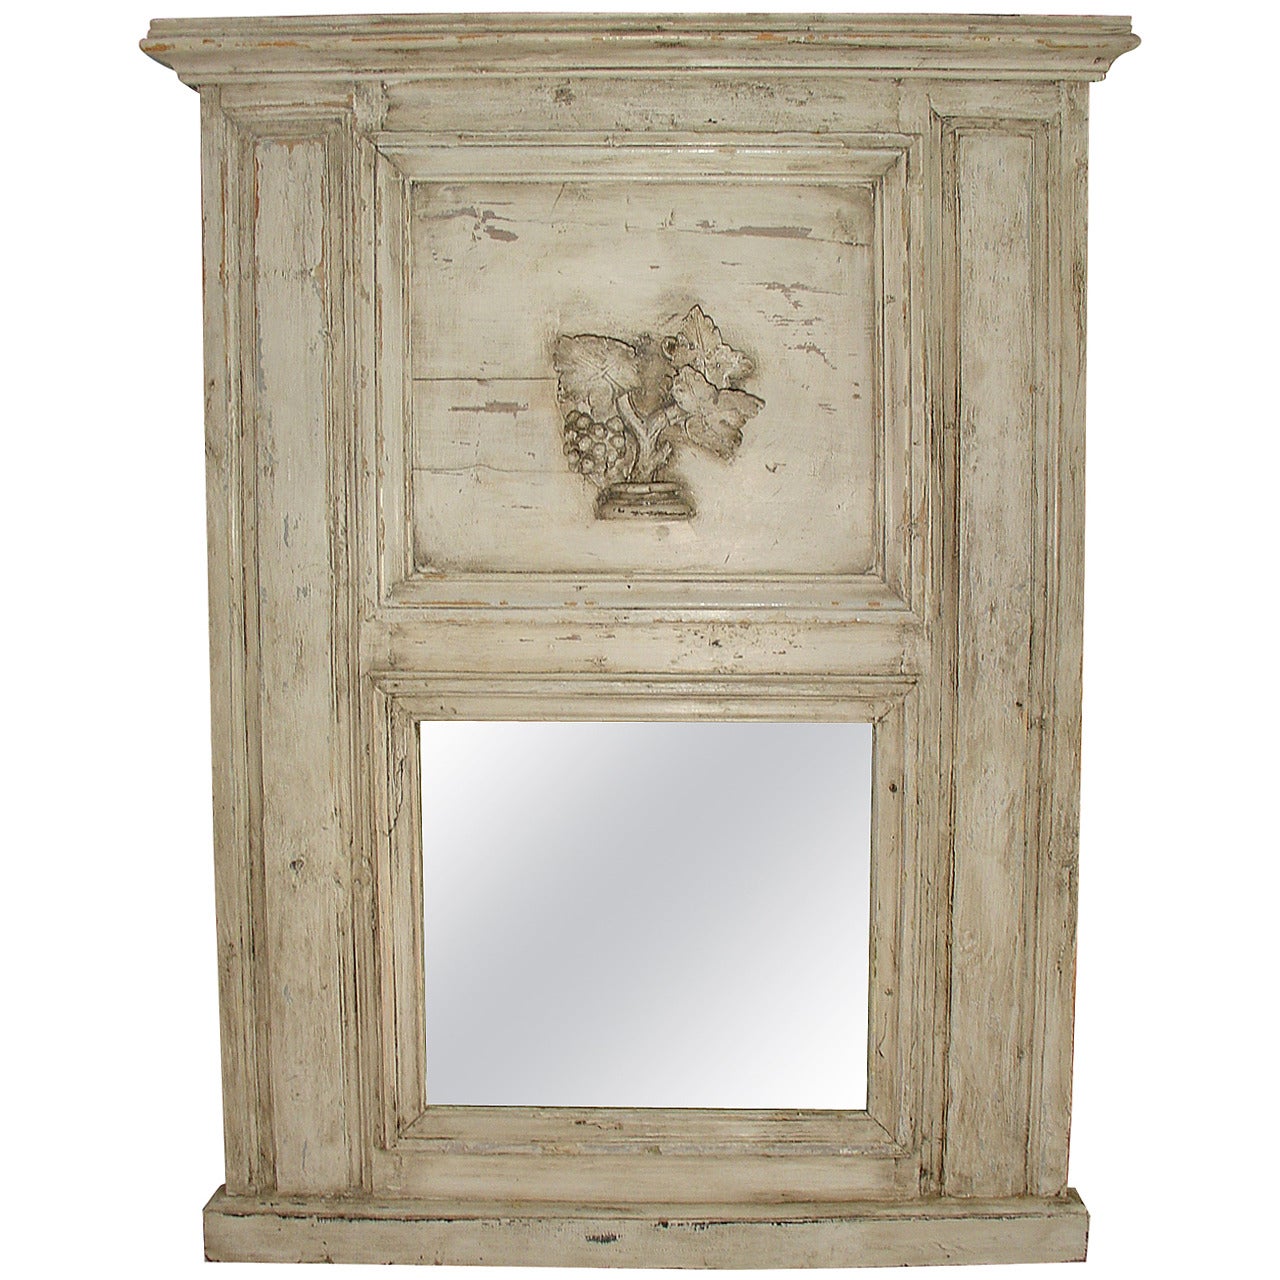 Antique French, Painted Trumeau Mirror from an 1860s French Boiserie